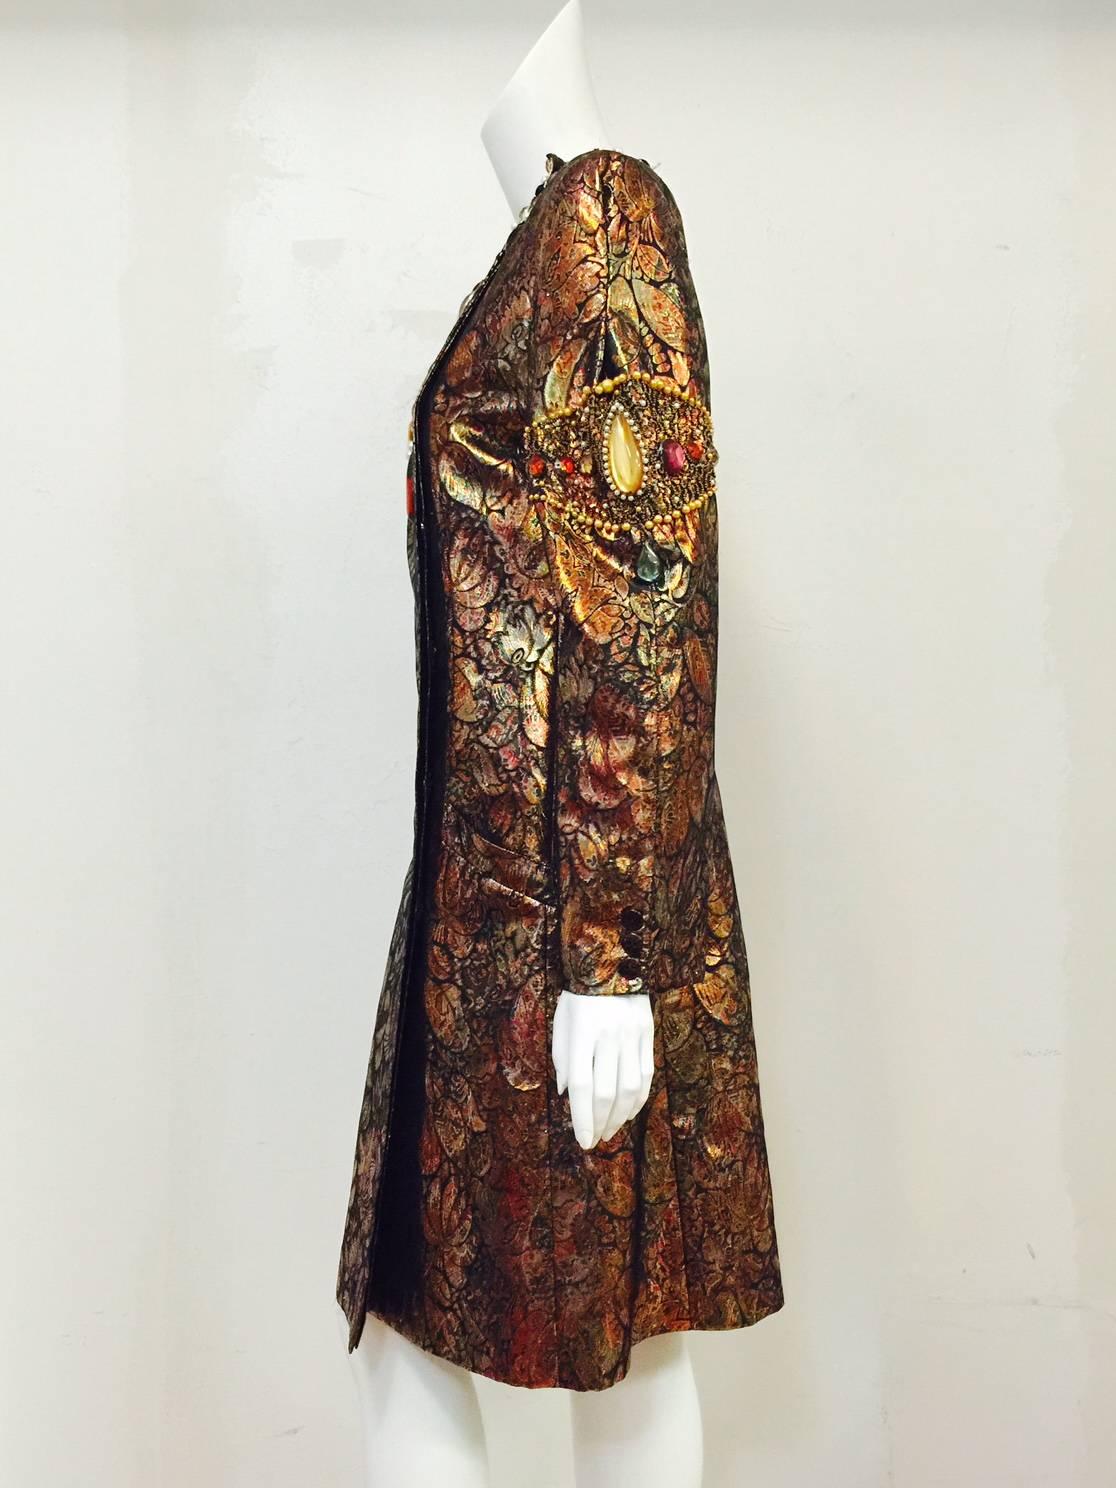 A most memorable entrance is guaranteed when wearing this incredible vintage confection from the Italian house Krizia!  Coat dress features ultra luxurious metallic silk brocade fabric in colors ranging from gold to bronze to copper!  Iridescent and